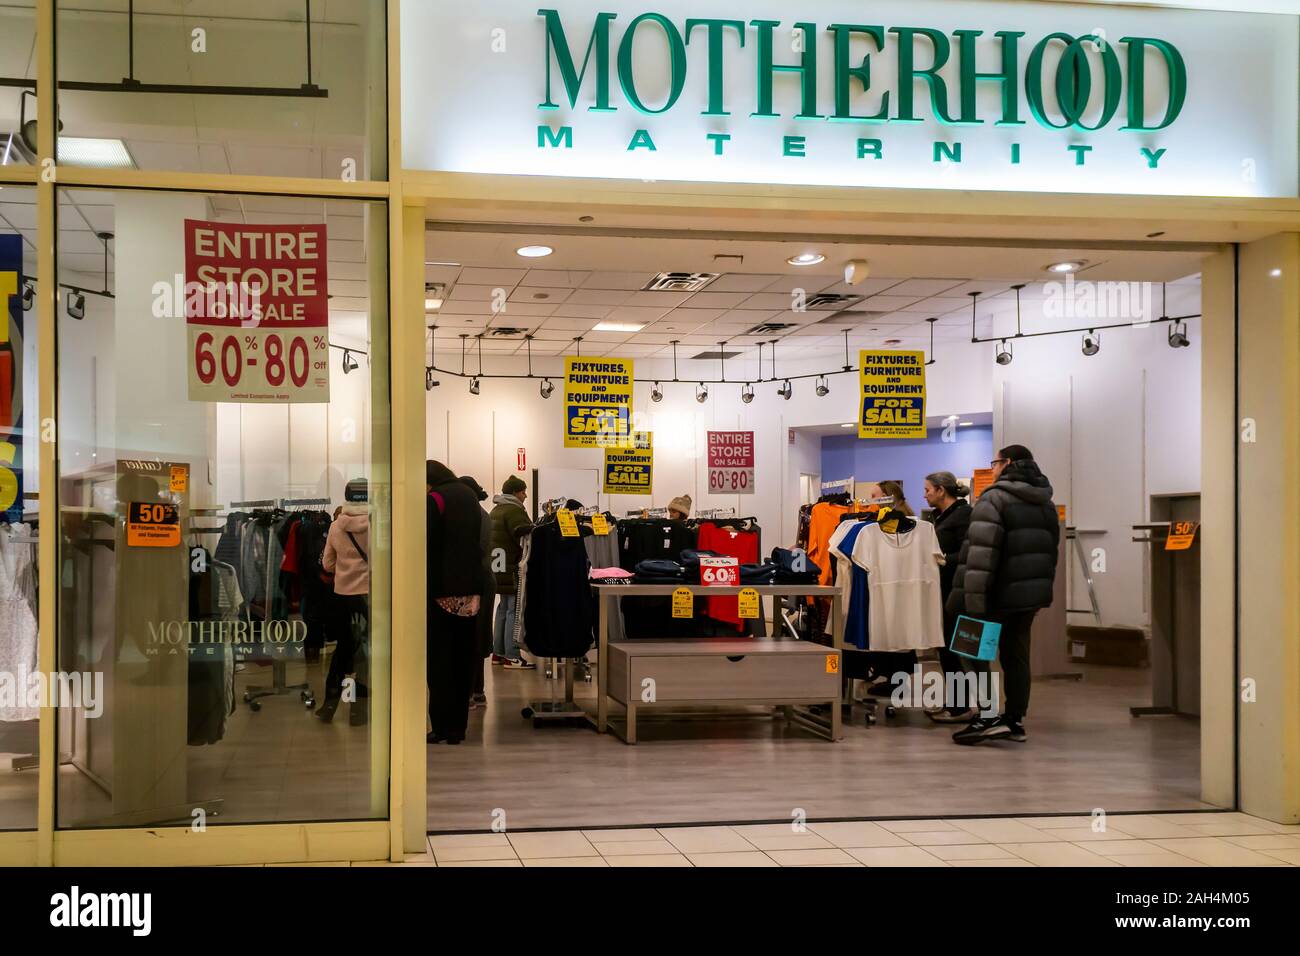 The Motherhood Maternity store announces its closing sales in the